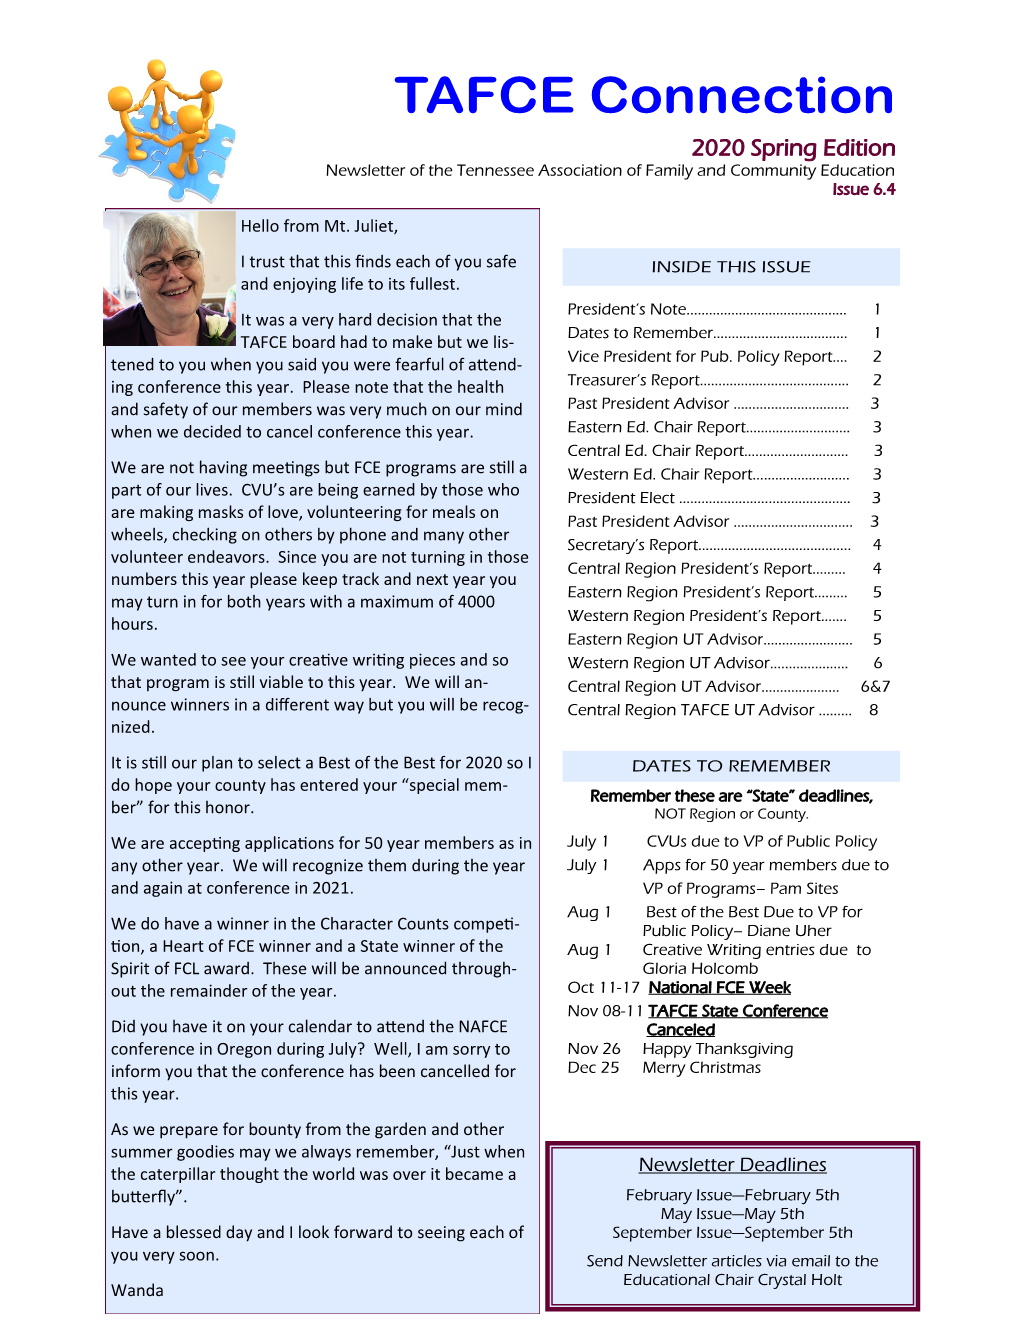 2020 Spring Edition Newsletter of the Tennessee Association of Family and Community Education Issue 6.4